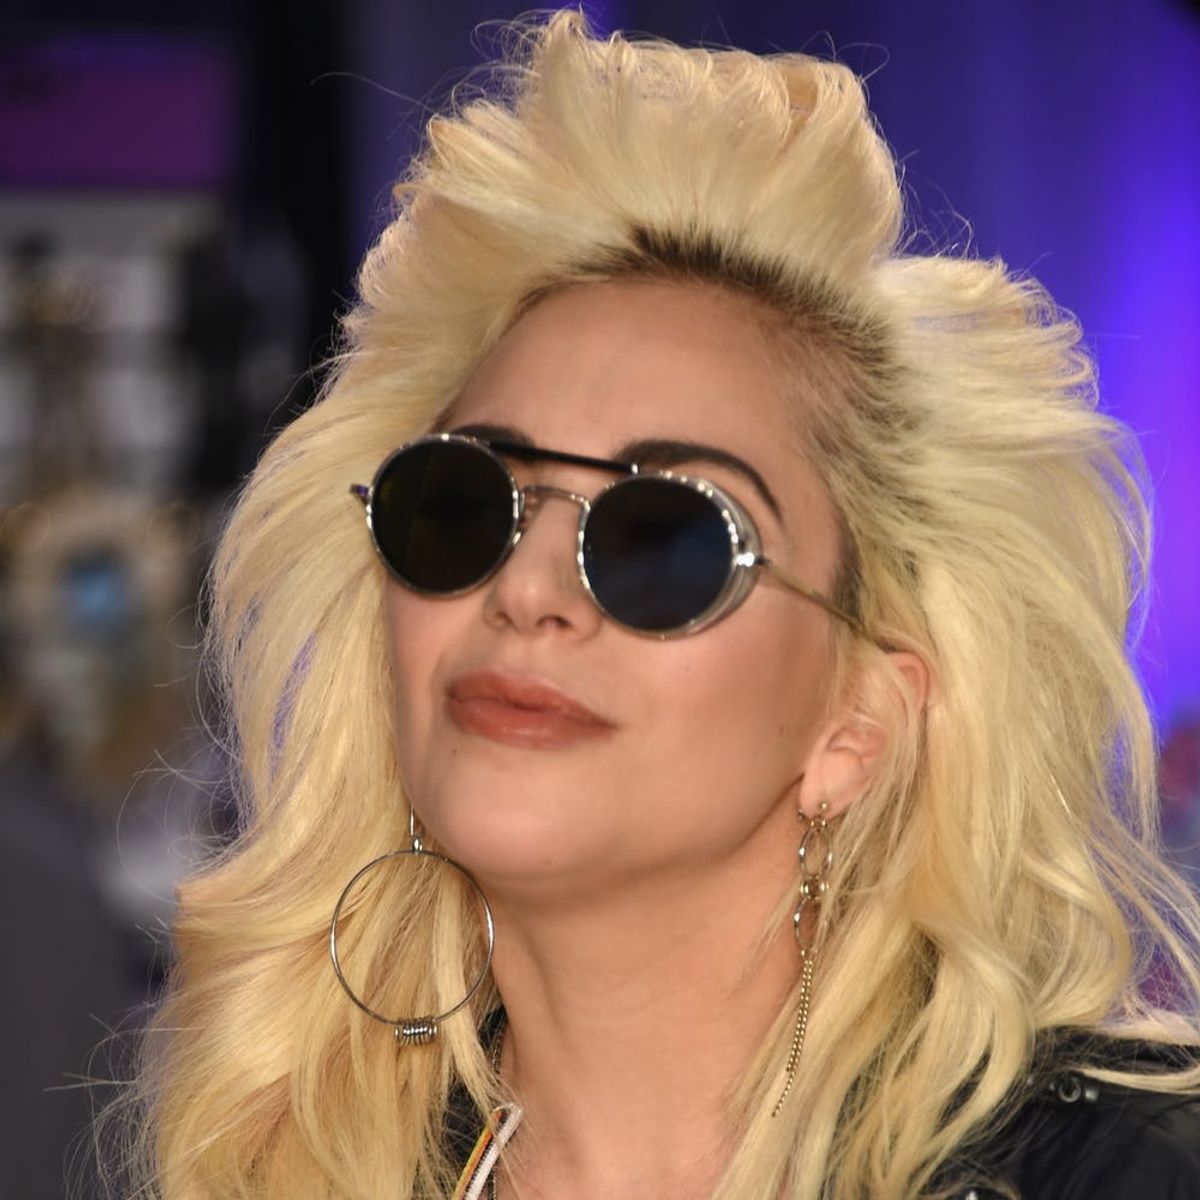 You Won’t Believe the Huge Life Milestone That Lady Gaga Is Just Now Accomplishing